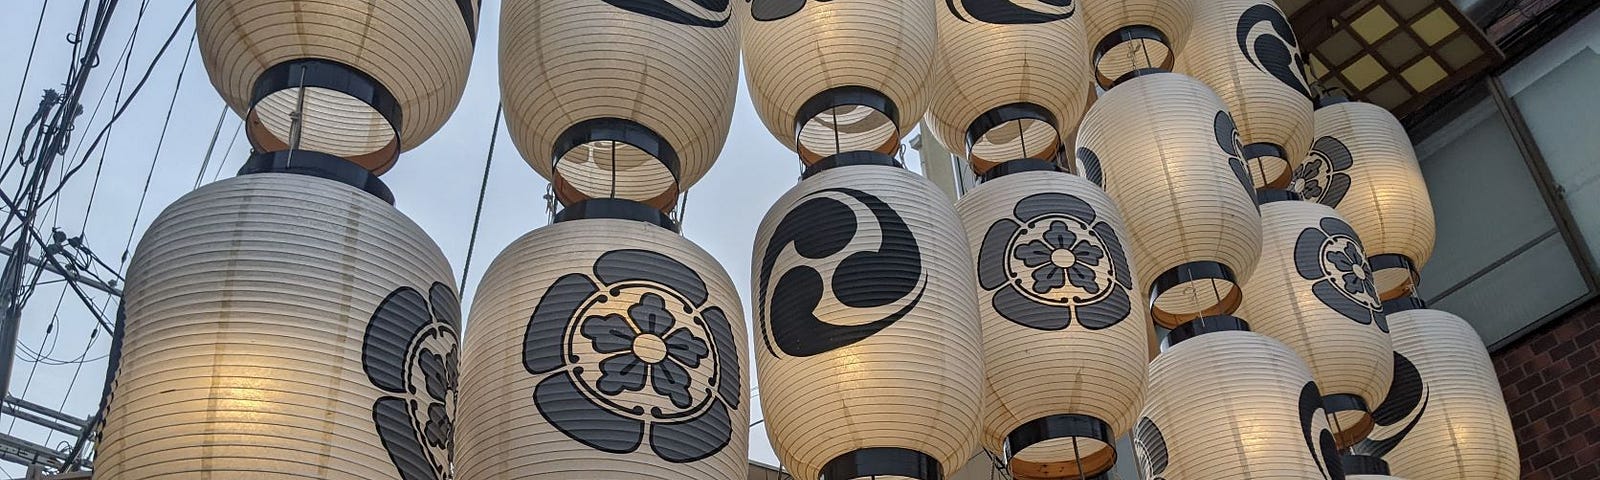 Float lanterns from Kyoto Gion festival